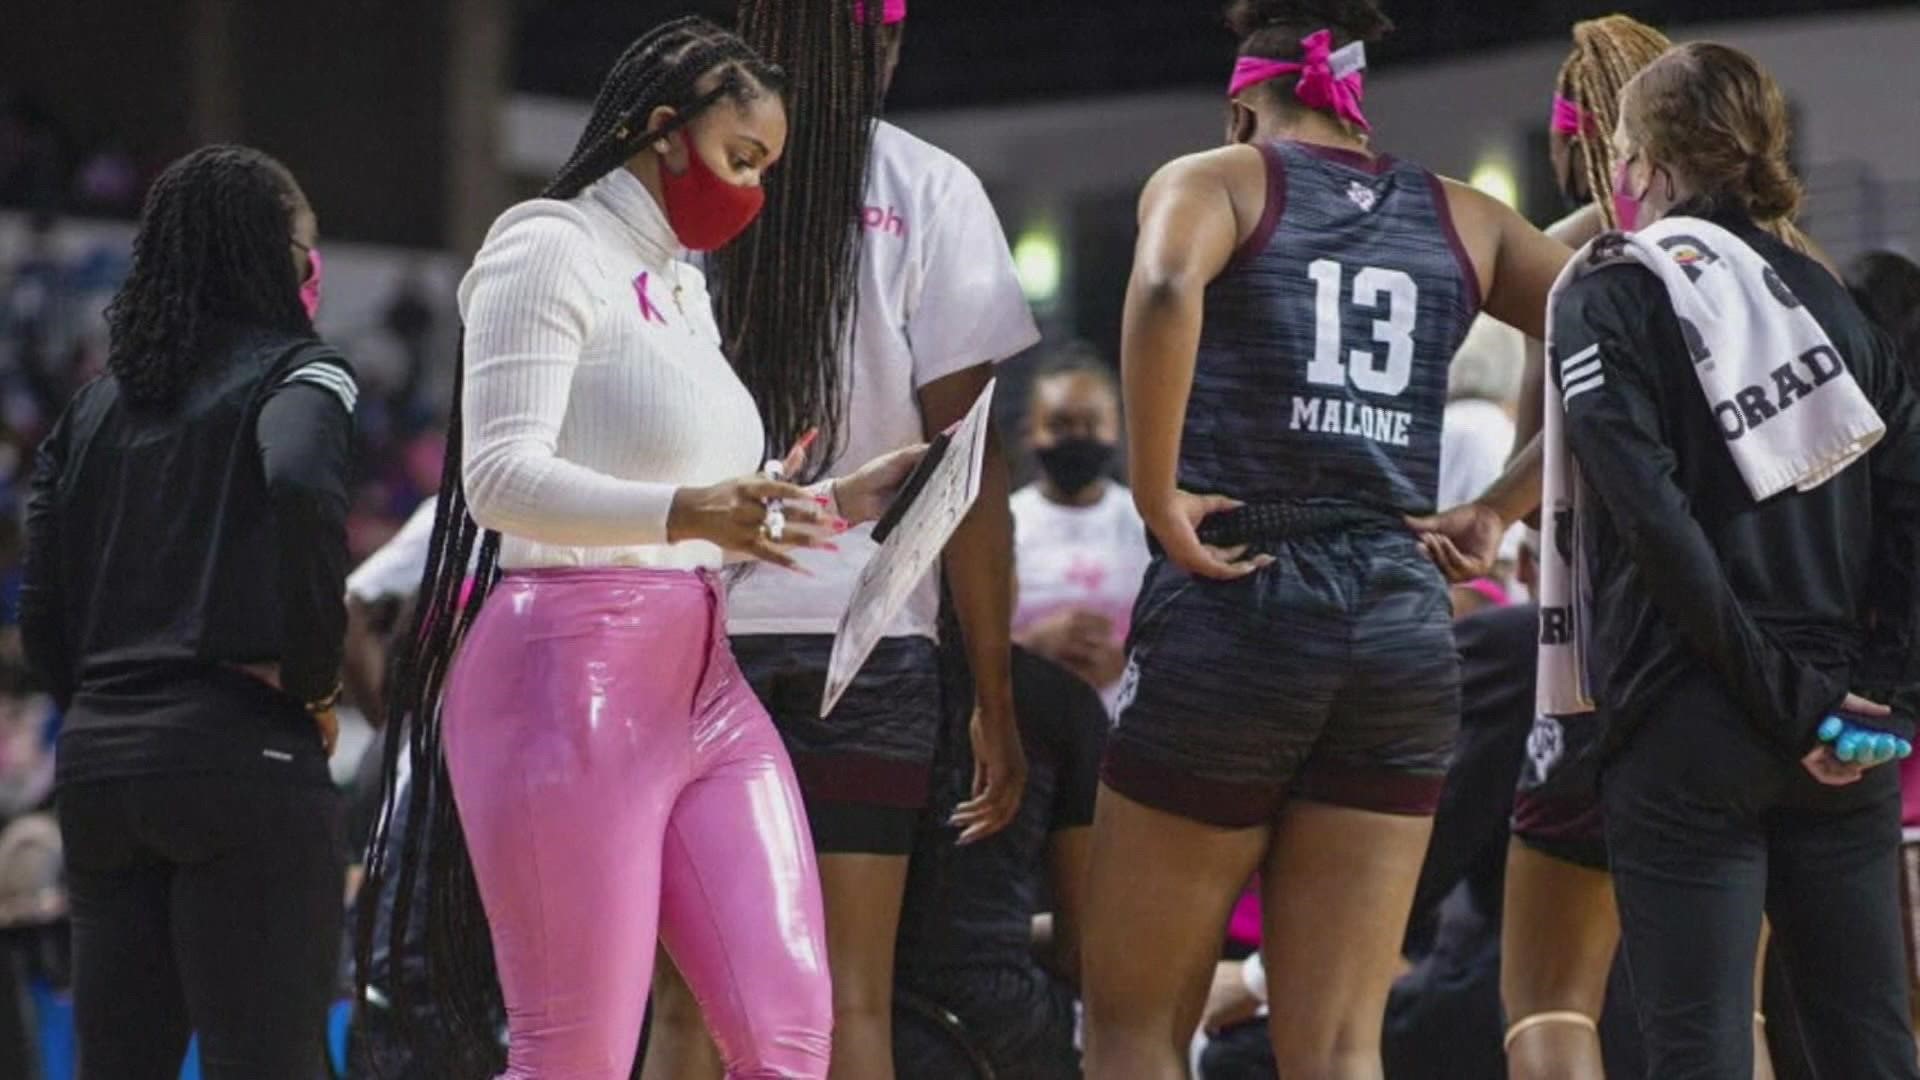 Sydney Carter didn't hold back when it came to responding to criticism over her wearing pink pants during a game.